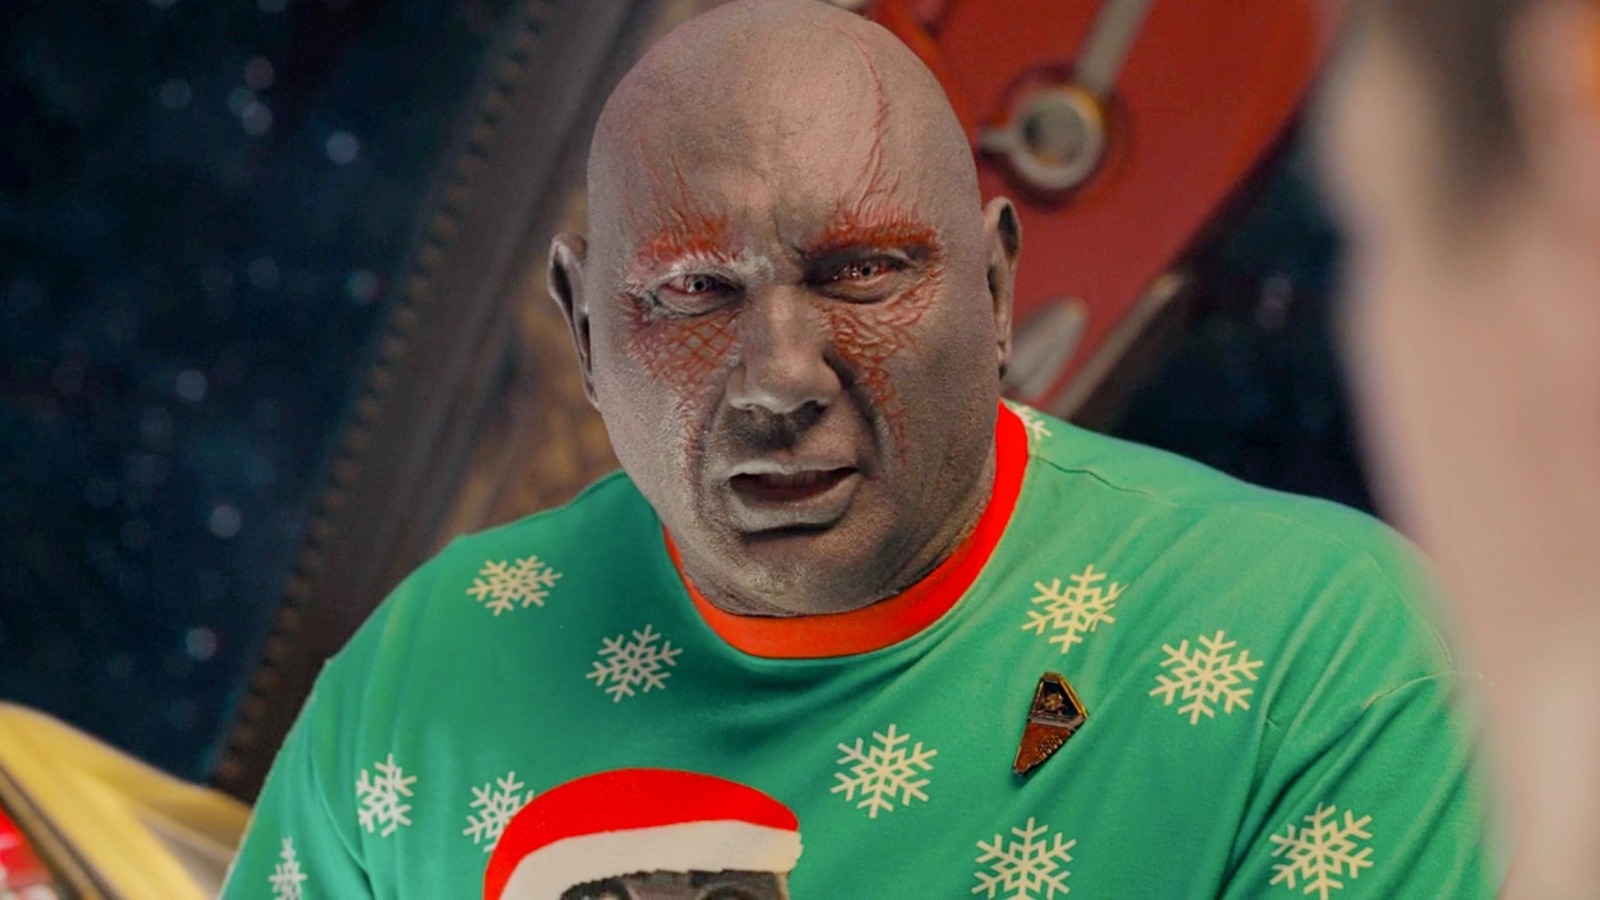 Guardians of the Galaxy Holiday Special Pays Tribute to One of the Worst Christmas Movies Ever Made